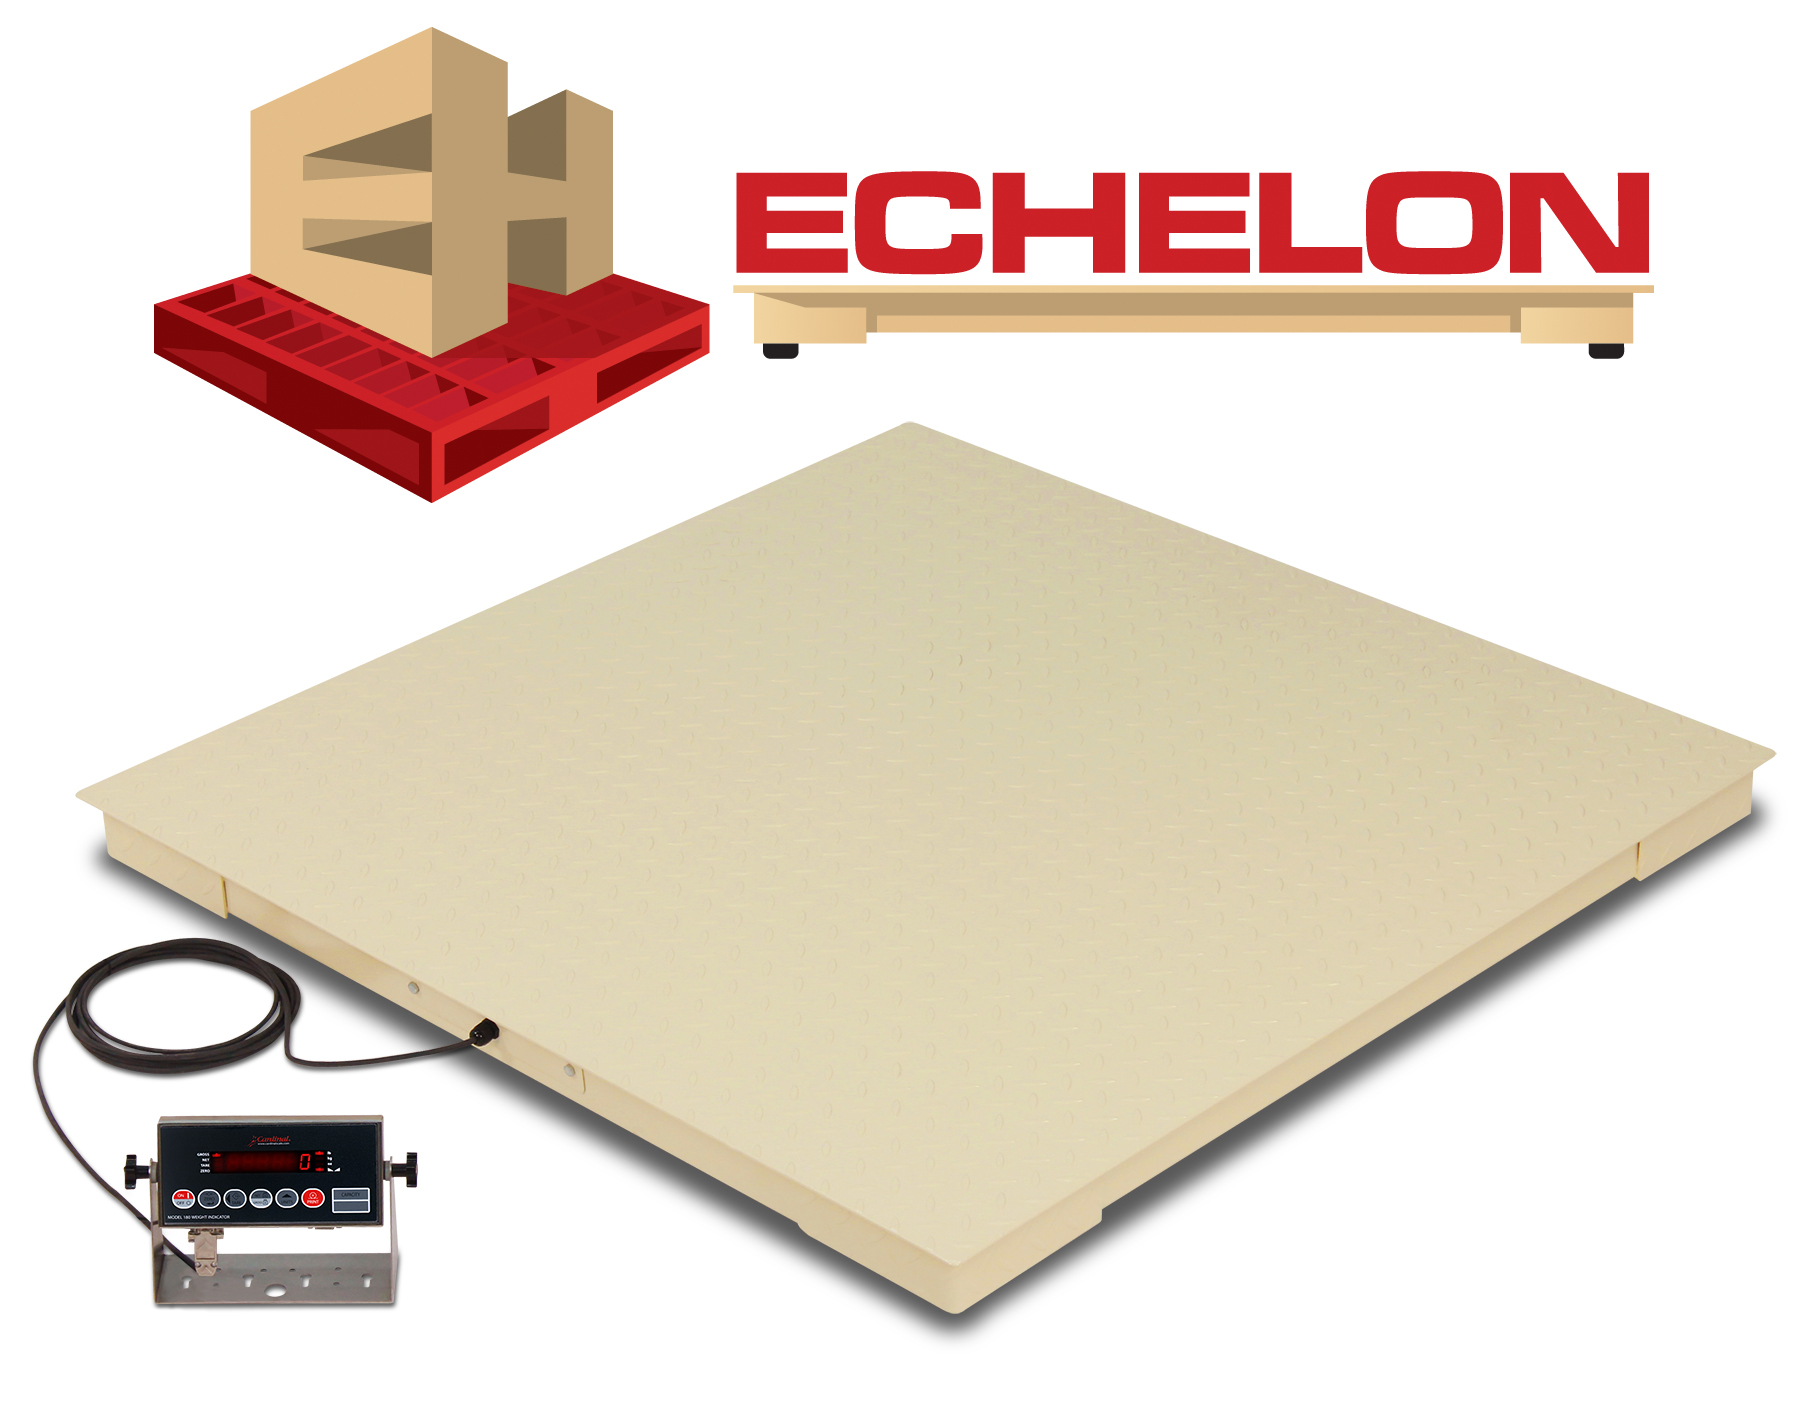 Cardinal Scale’s New Echelon EH Series Economical Floor Scales for Industrial Paller and Warehouse Weighing